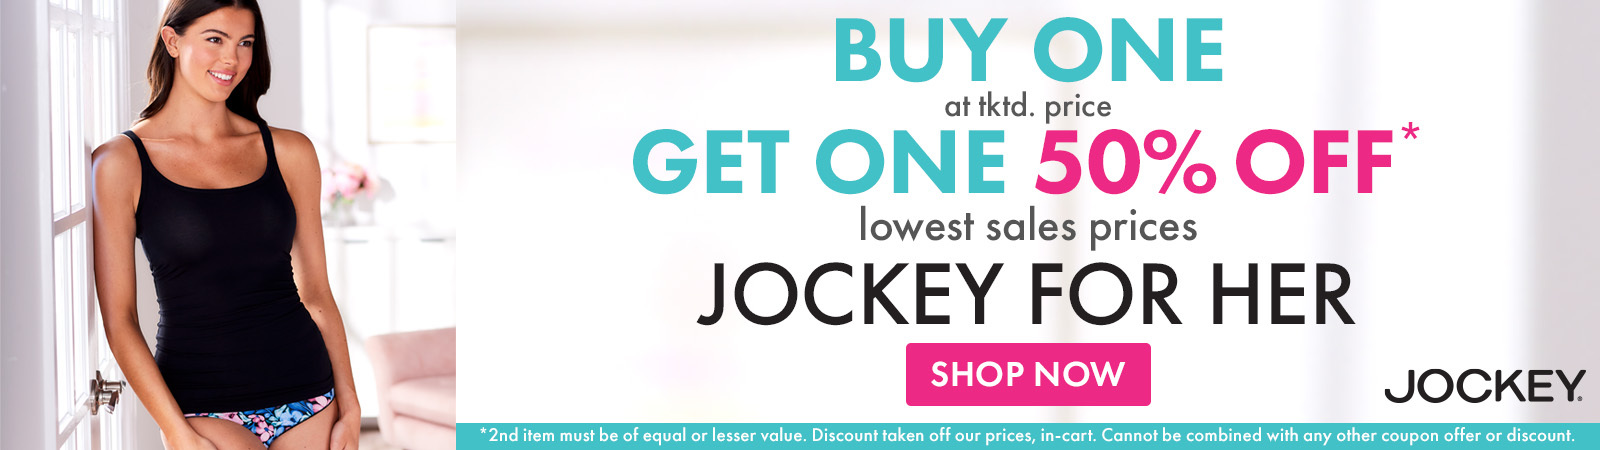 Buy 1 at tktd. price, Get 1 50% Off* lowest sale prices, Jockey for Her